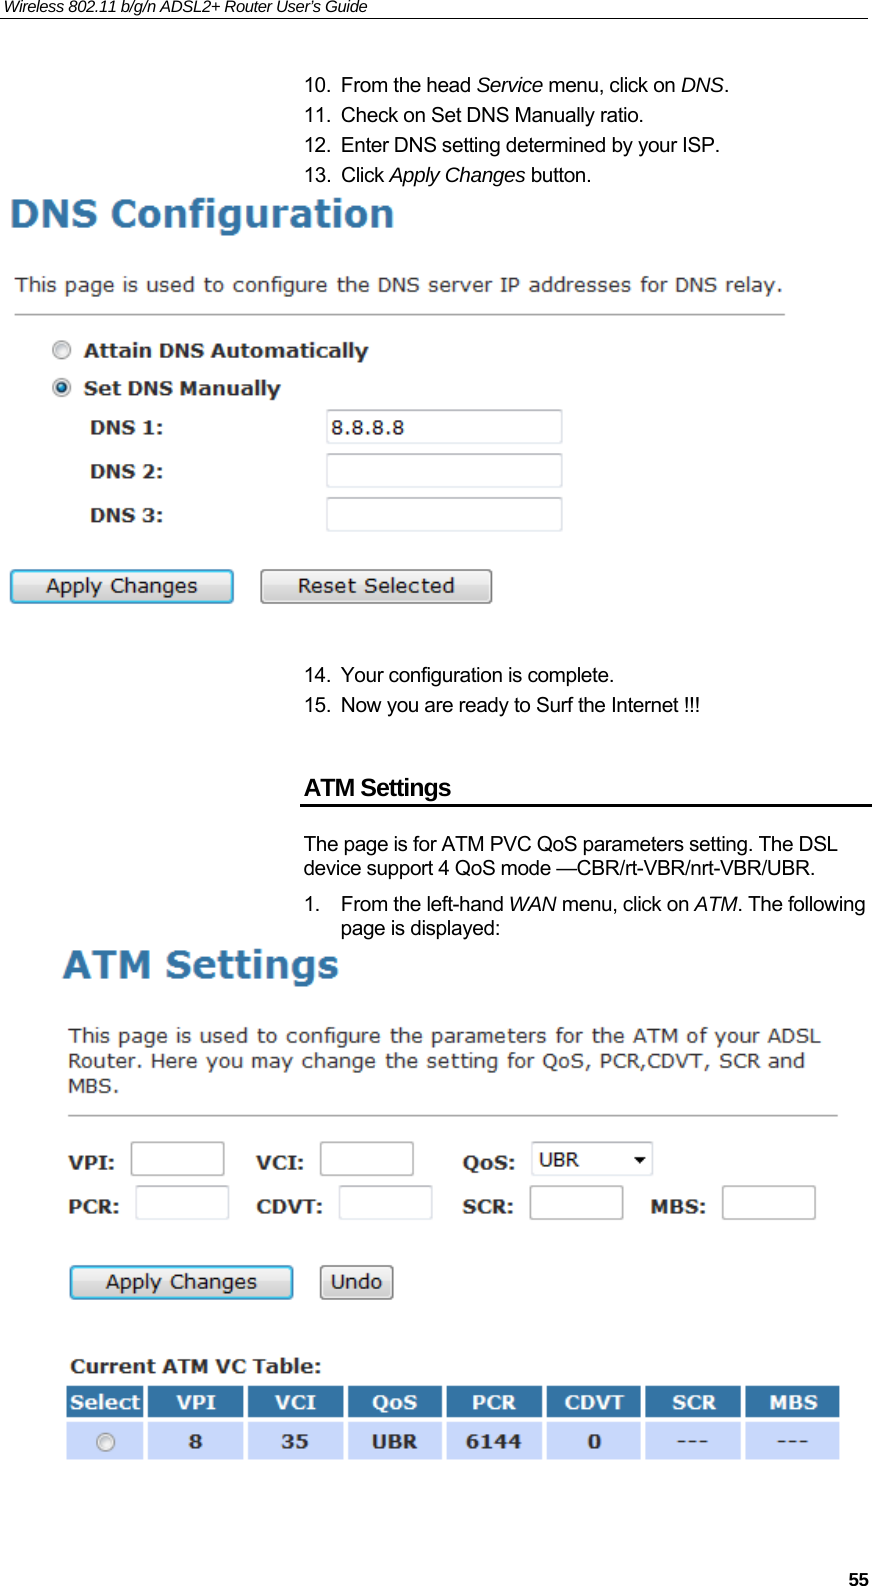 Wireless 802.11 b/g/n ADSL2+ Router User’s Guide    10. From the head Service menu, click on DNS. 11.  Check on Set DNS Manually ratio. 12.  Enter DNS setting determined by your ISP. 13. Click Apply Changes button.   14.  Your configuration is complete. 15.  Now you are ready to Surf the Internet !!!  ATM Settings The page is for ATM PVC QoS parameters setting. The DSL device support 4 QoS mode —CBR/rt-VBR/nrt-VBR/UBR. 1.  From the left-hand WAN menu, click on ATM. The following page is displayed:     55